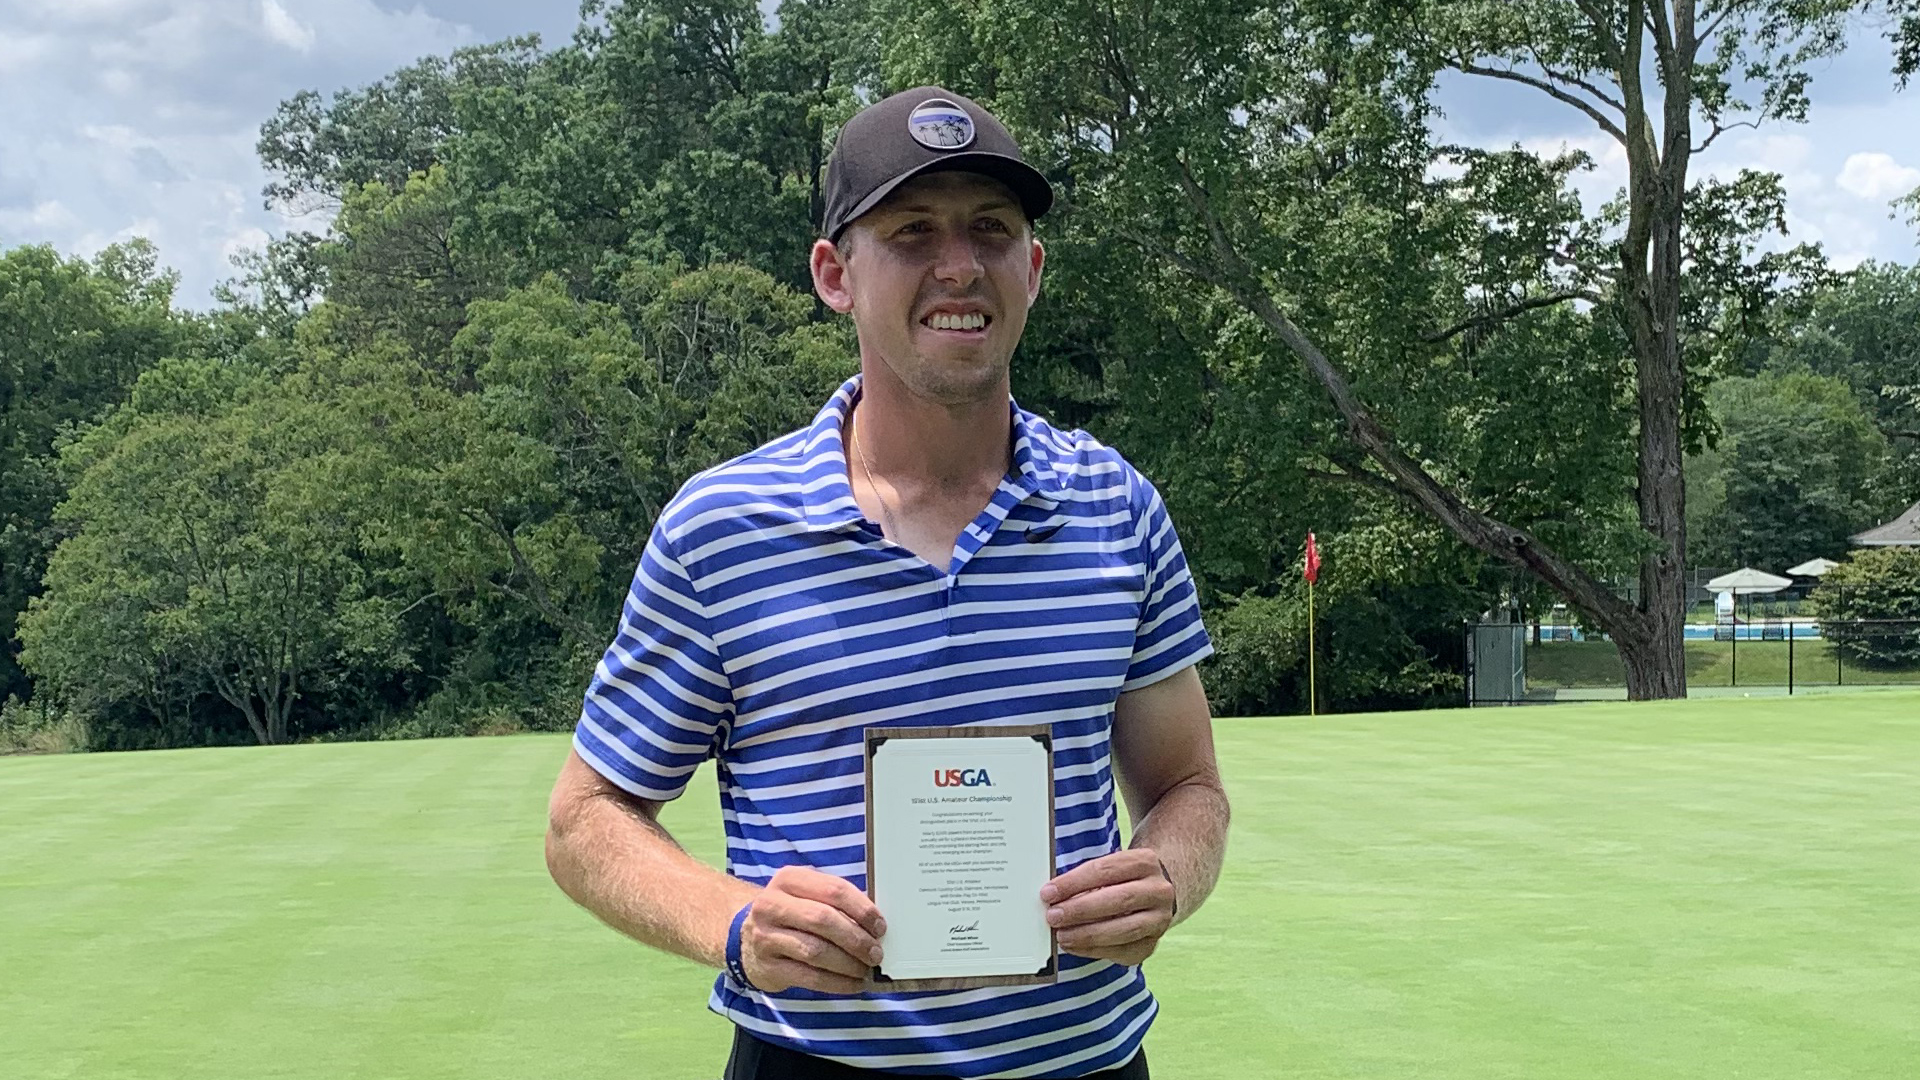 Jacob Cook Becomes Second Wildcat to Qualify for U.S. Amateur